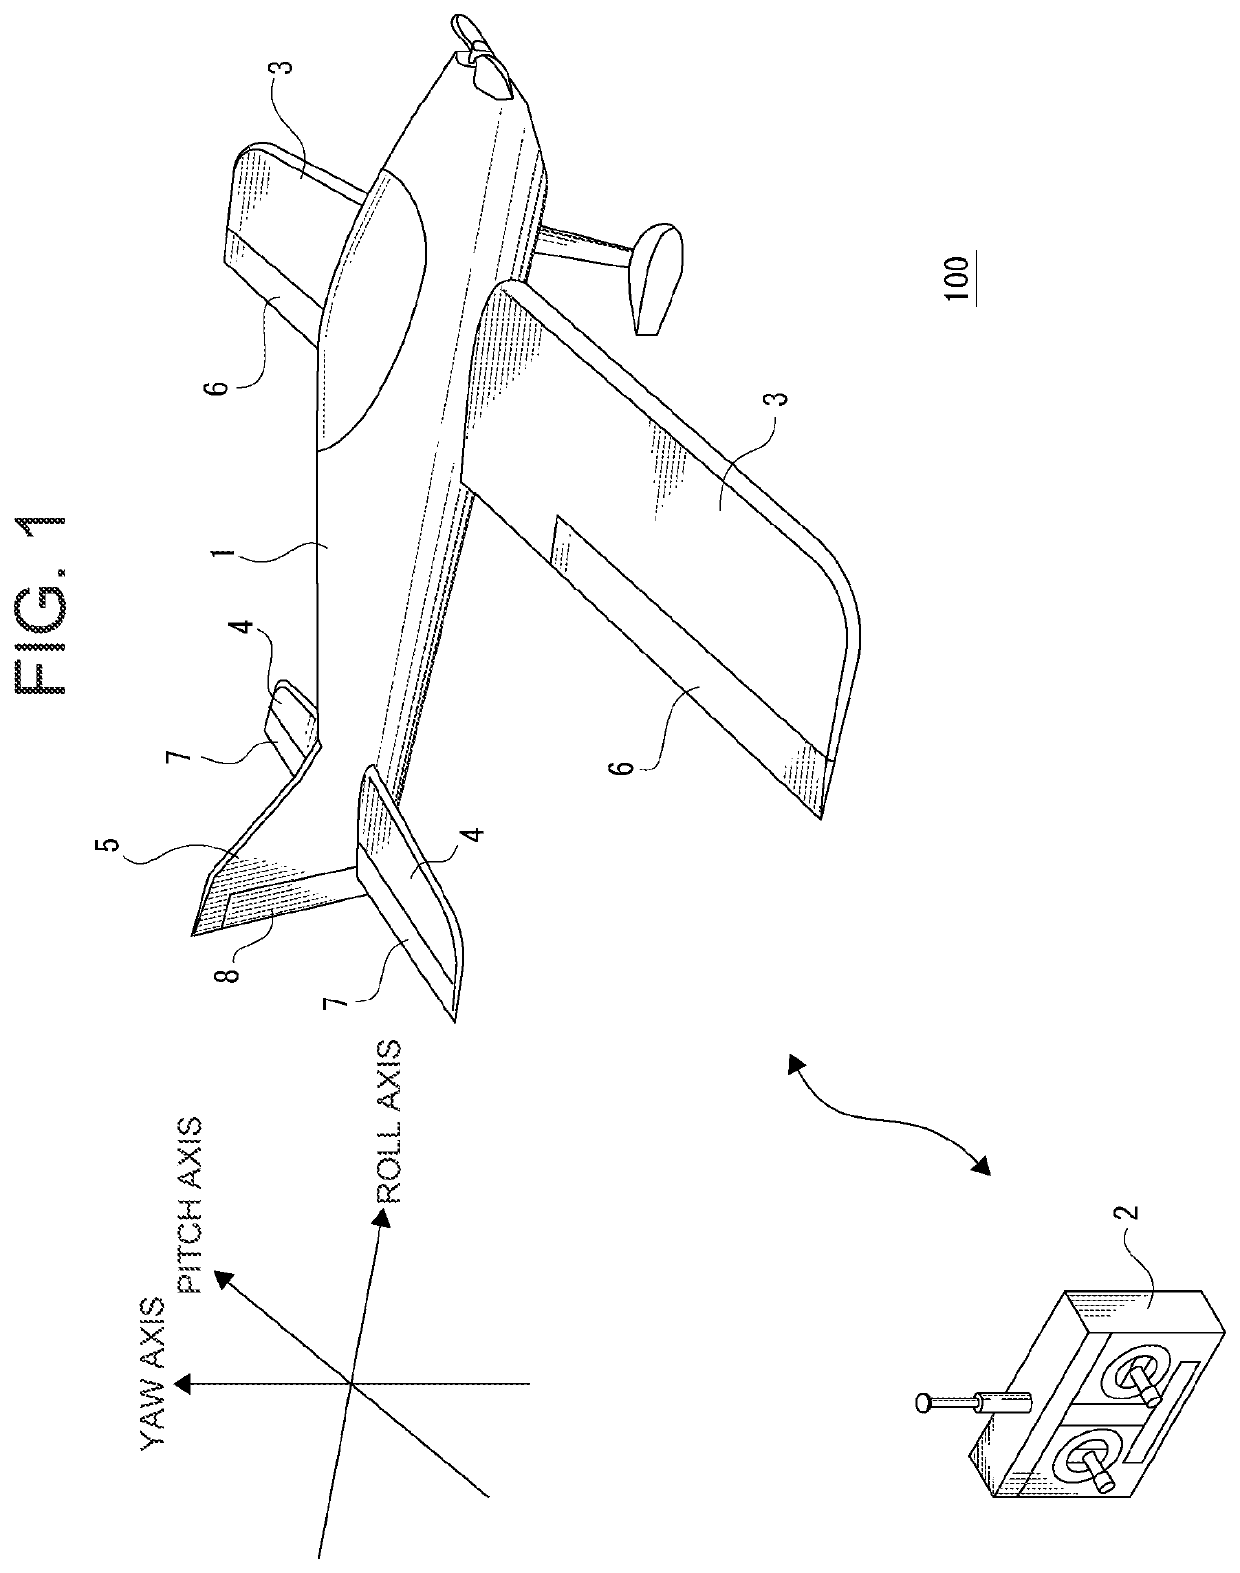 Arithmetic Processing Device and Wireless Controlled Airplane